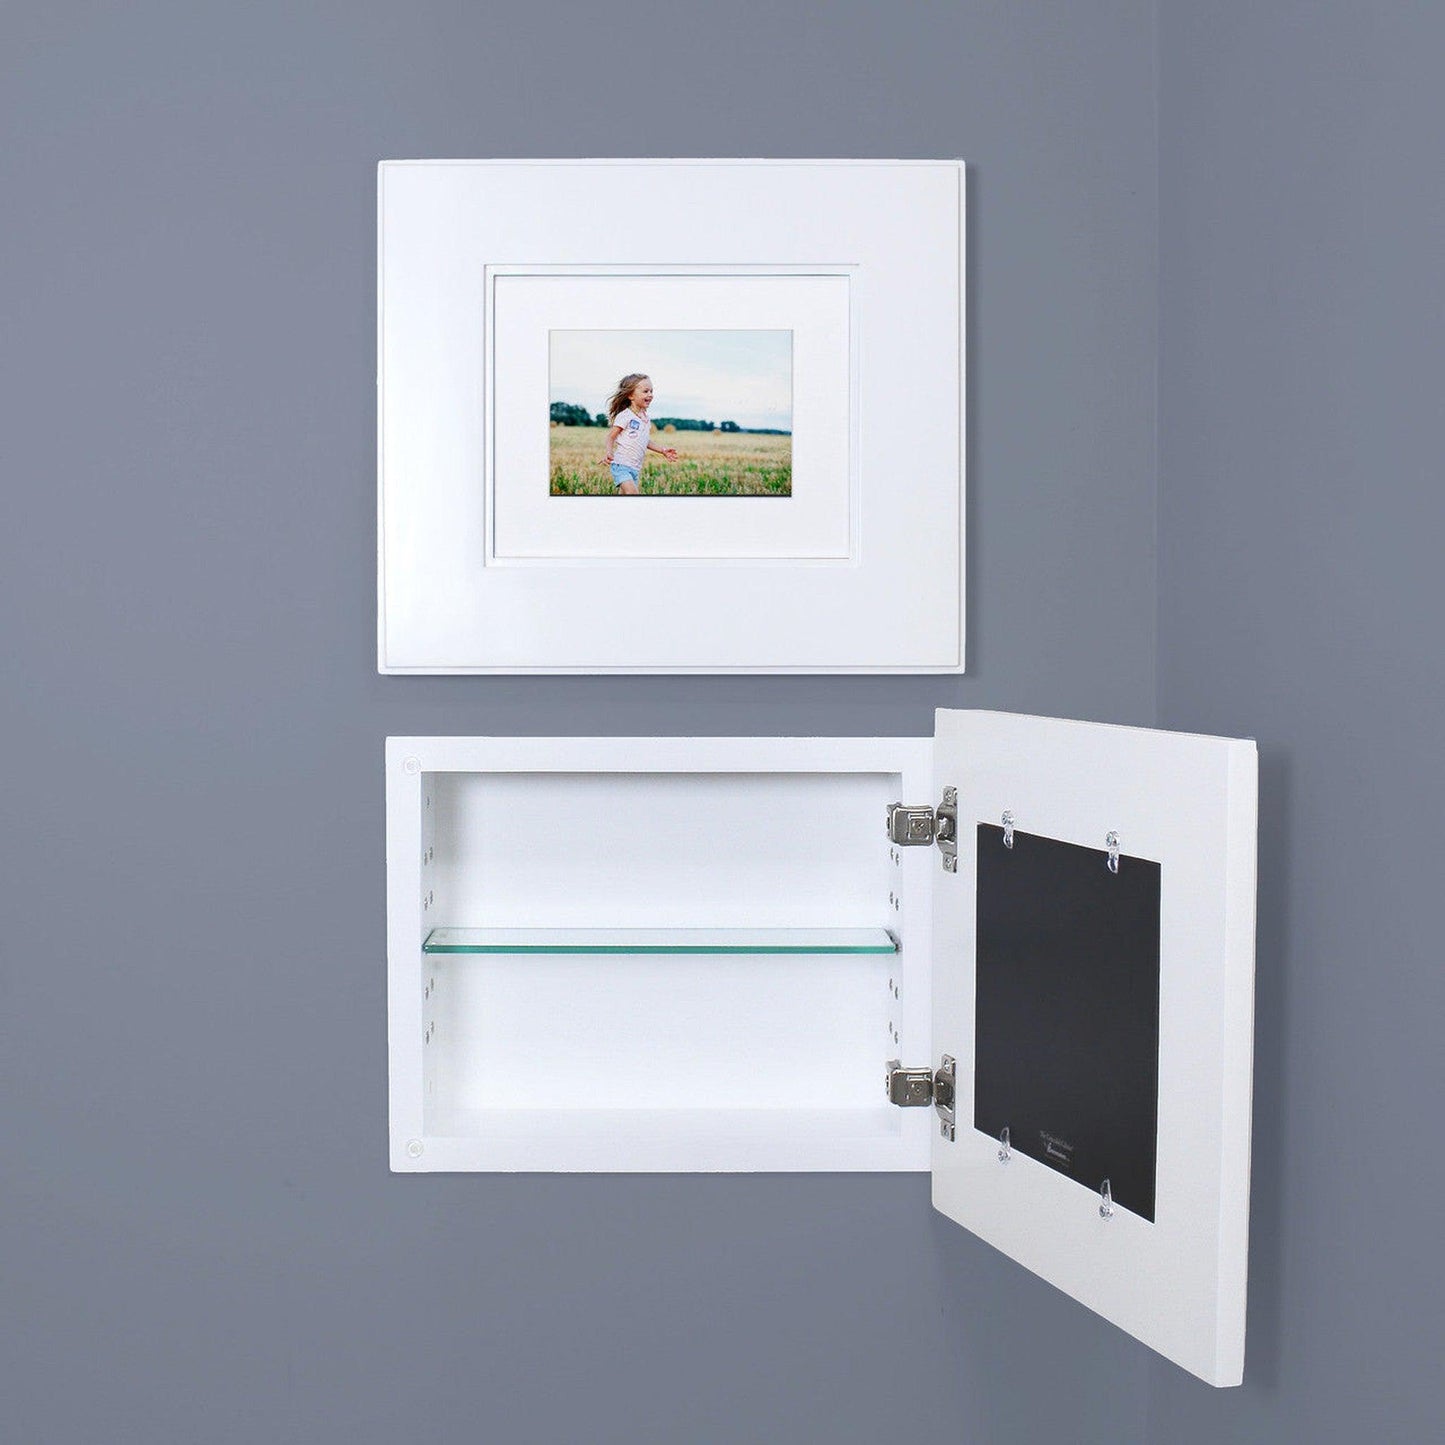 Fox Hollow Furnishings 14" x 11" White Compact Landscape Shaker Special 3" Depth Recessed Picture Frame Medicine Cabinet